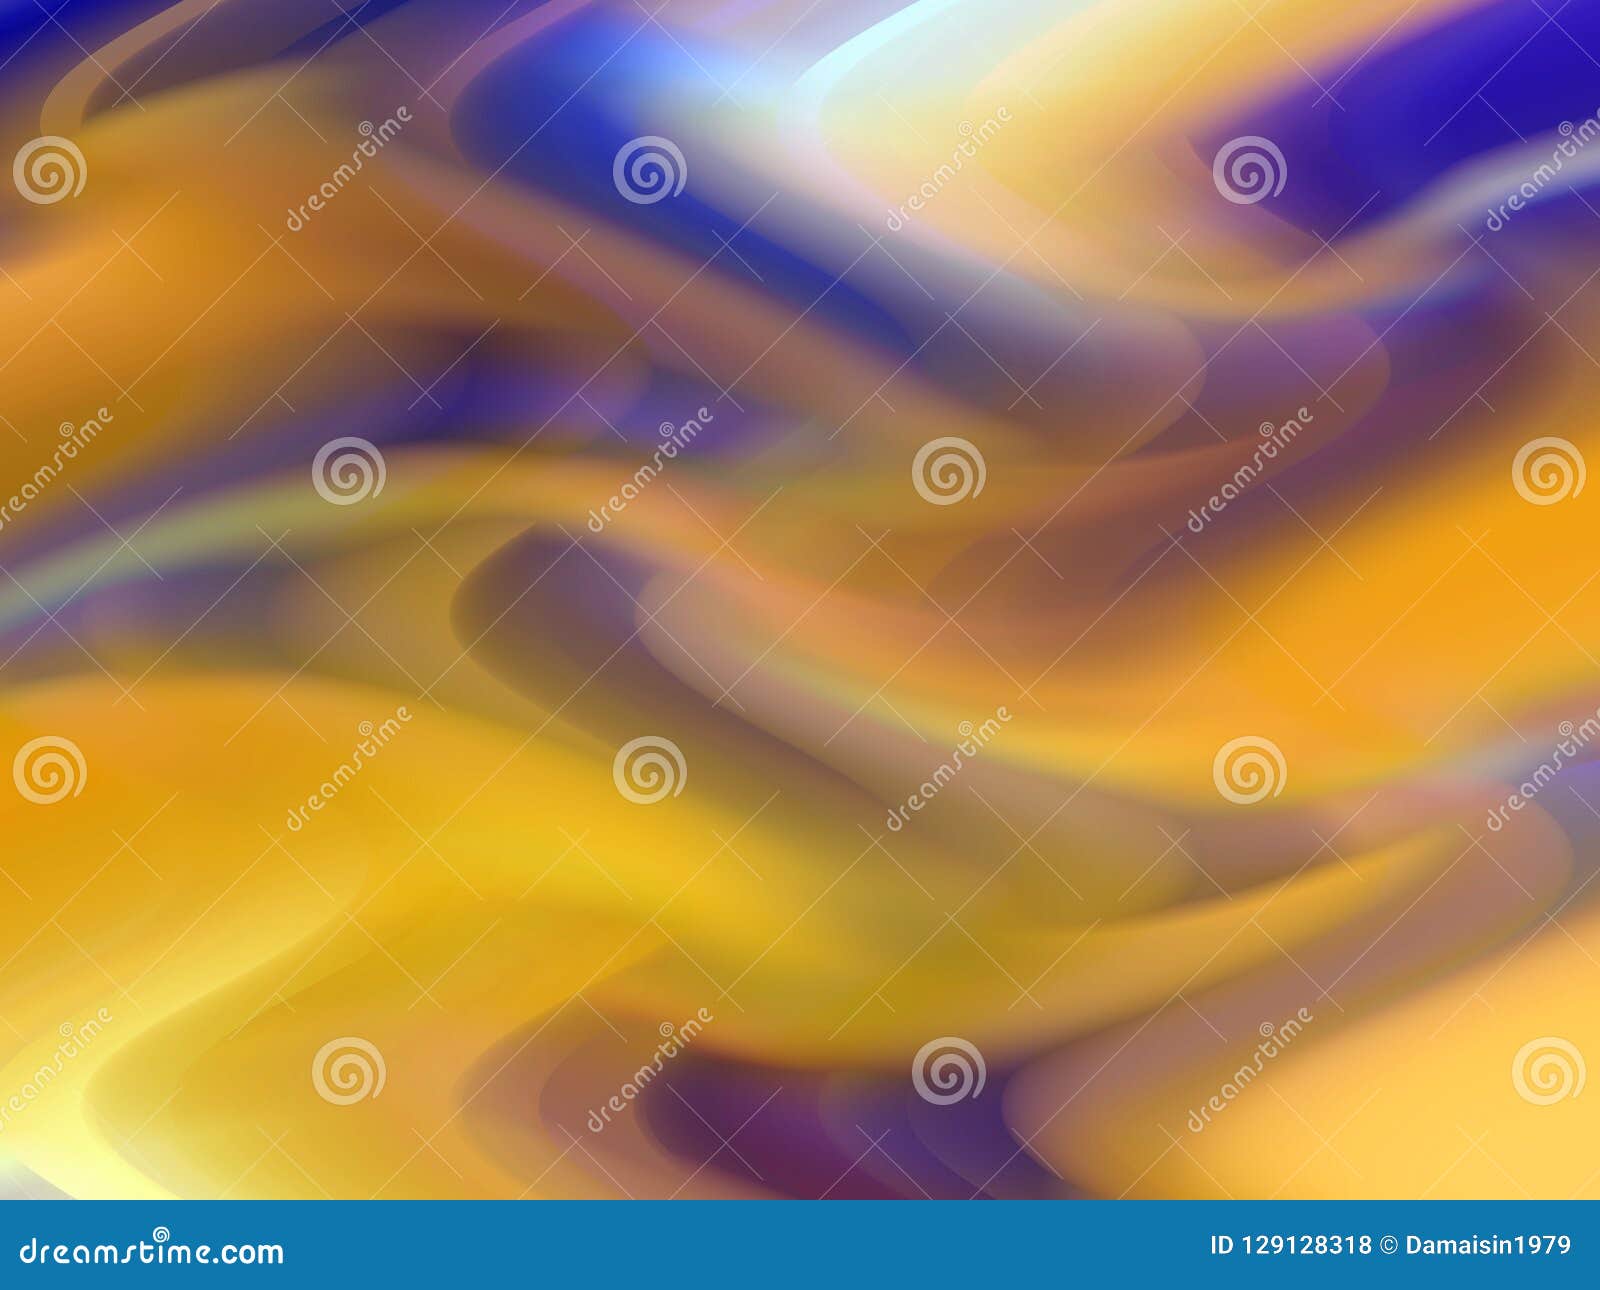 gold blue purple gray soft geometries, lights background, graphics, abstract background and texture